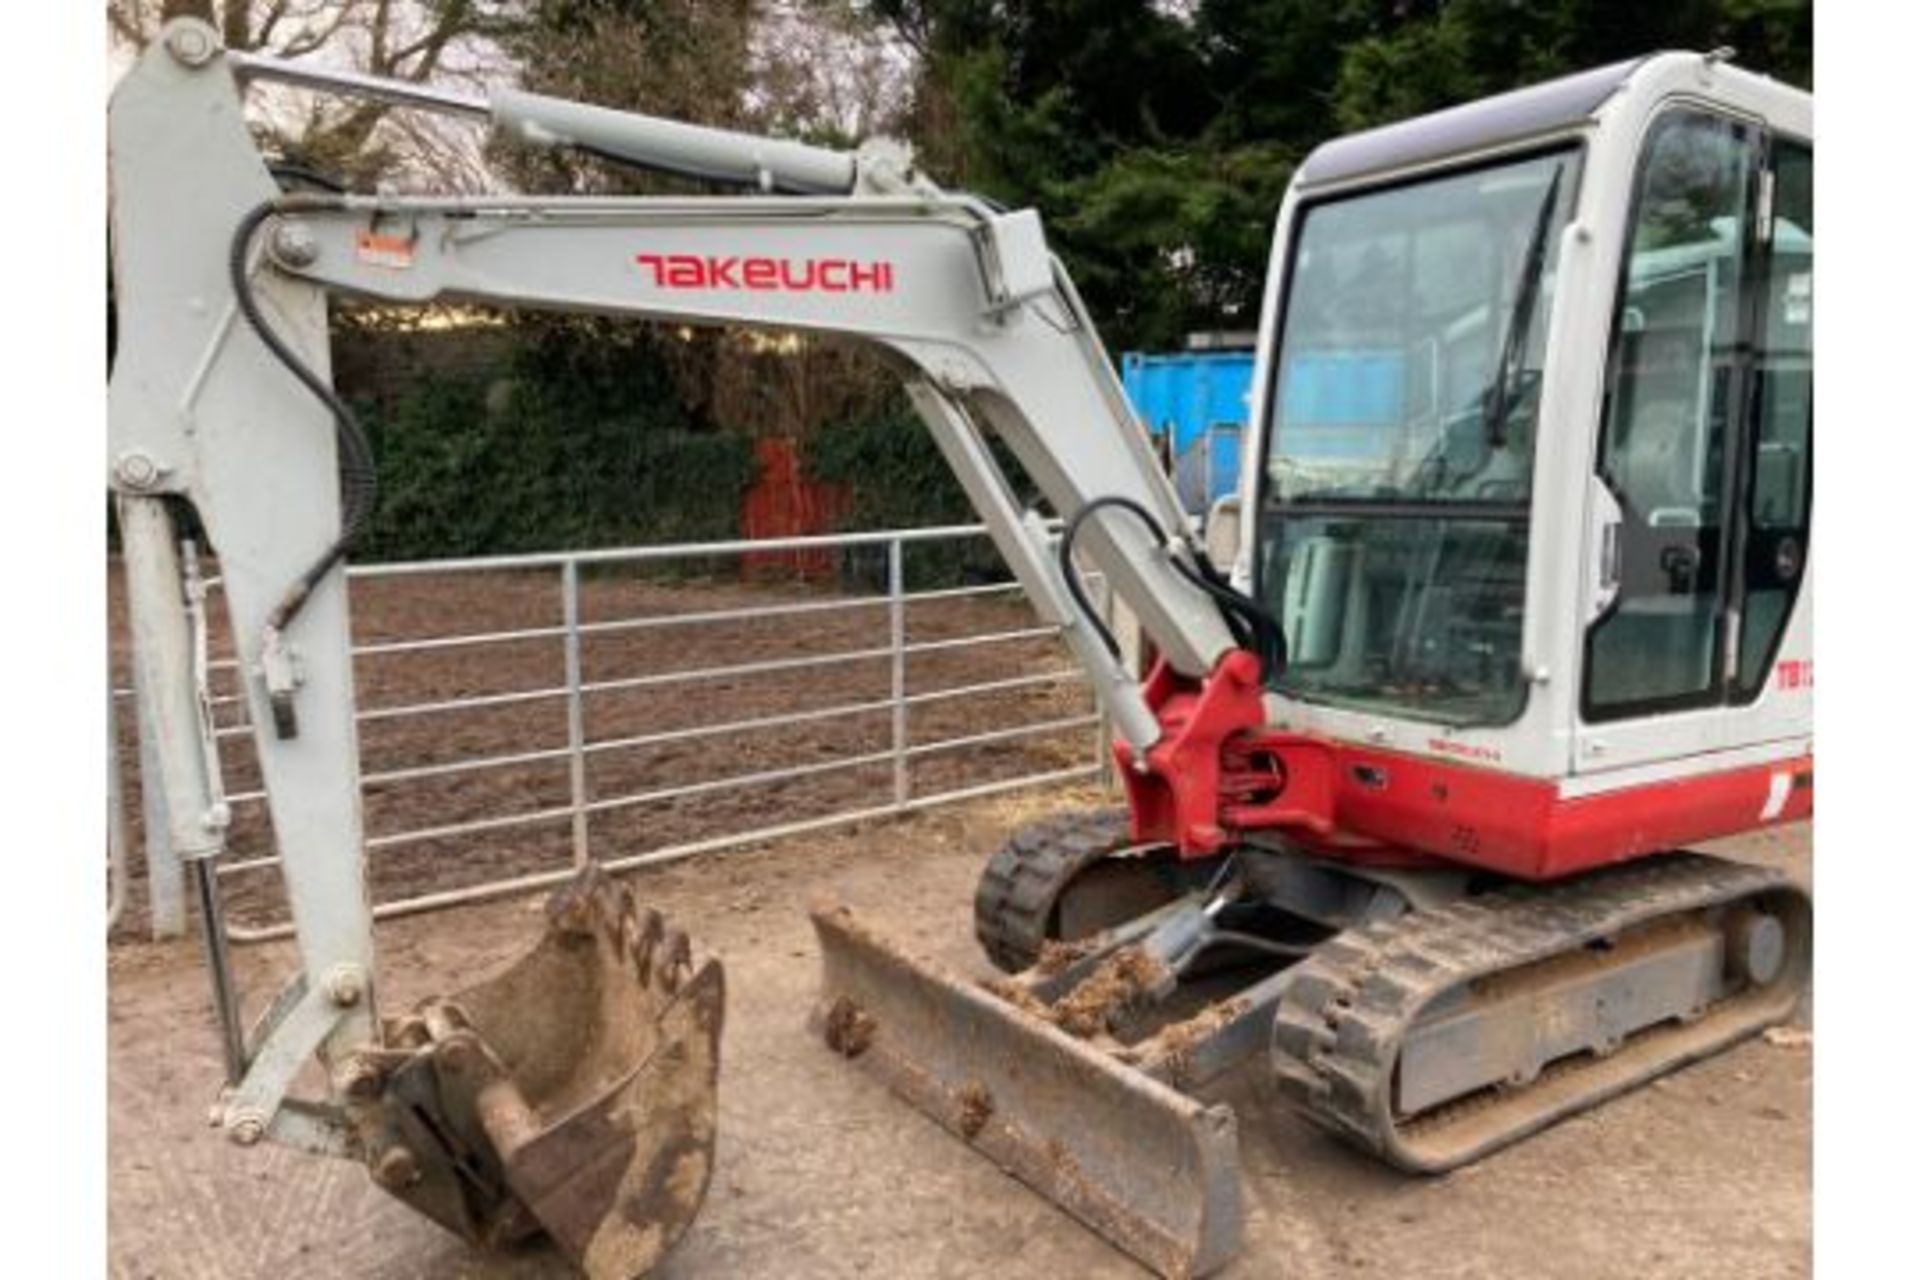 TAKEUCHI MINI DIGGER 3 TON .ONLY 1300 HOURS FROM NEW .PLUS VAT LOCATED IN NORTHERN IRELAND. - Image 3 of 5